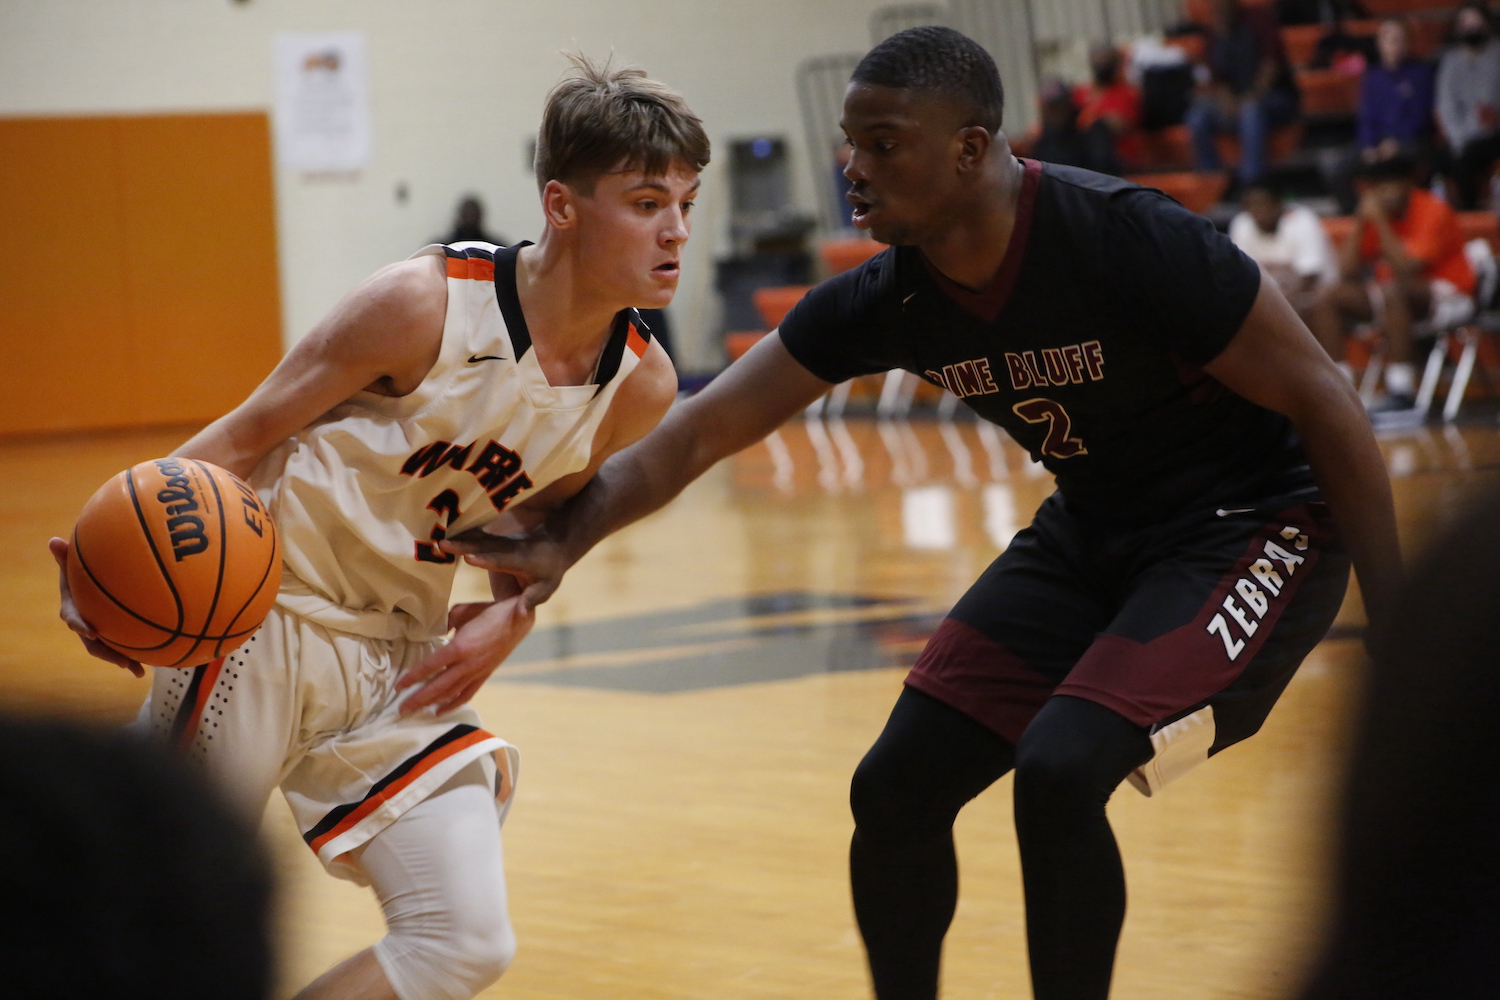 Lumberjacks struggle shooting against a talented Pine Bluff team-Photos included